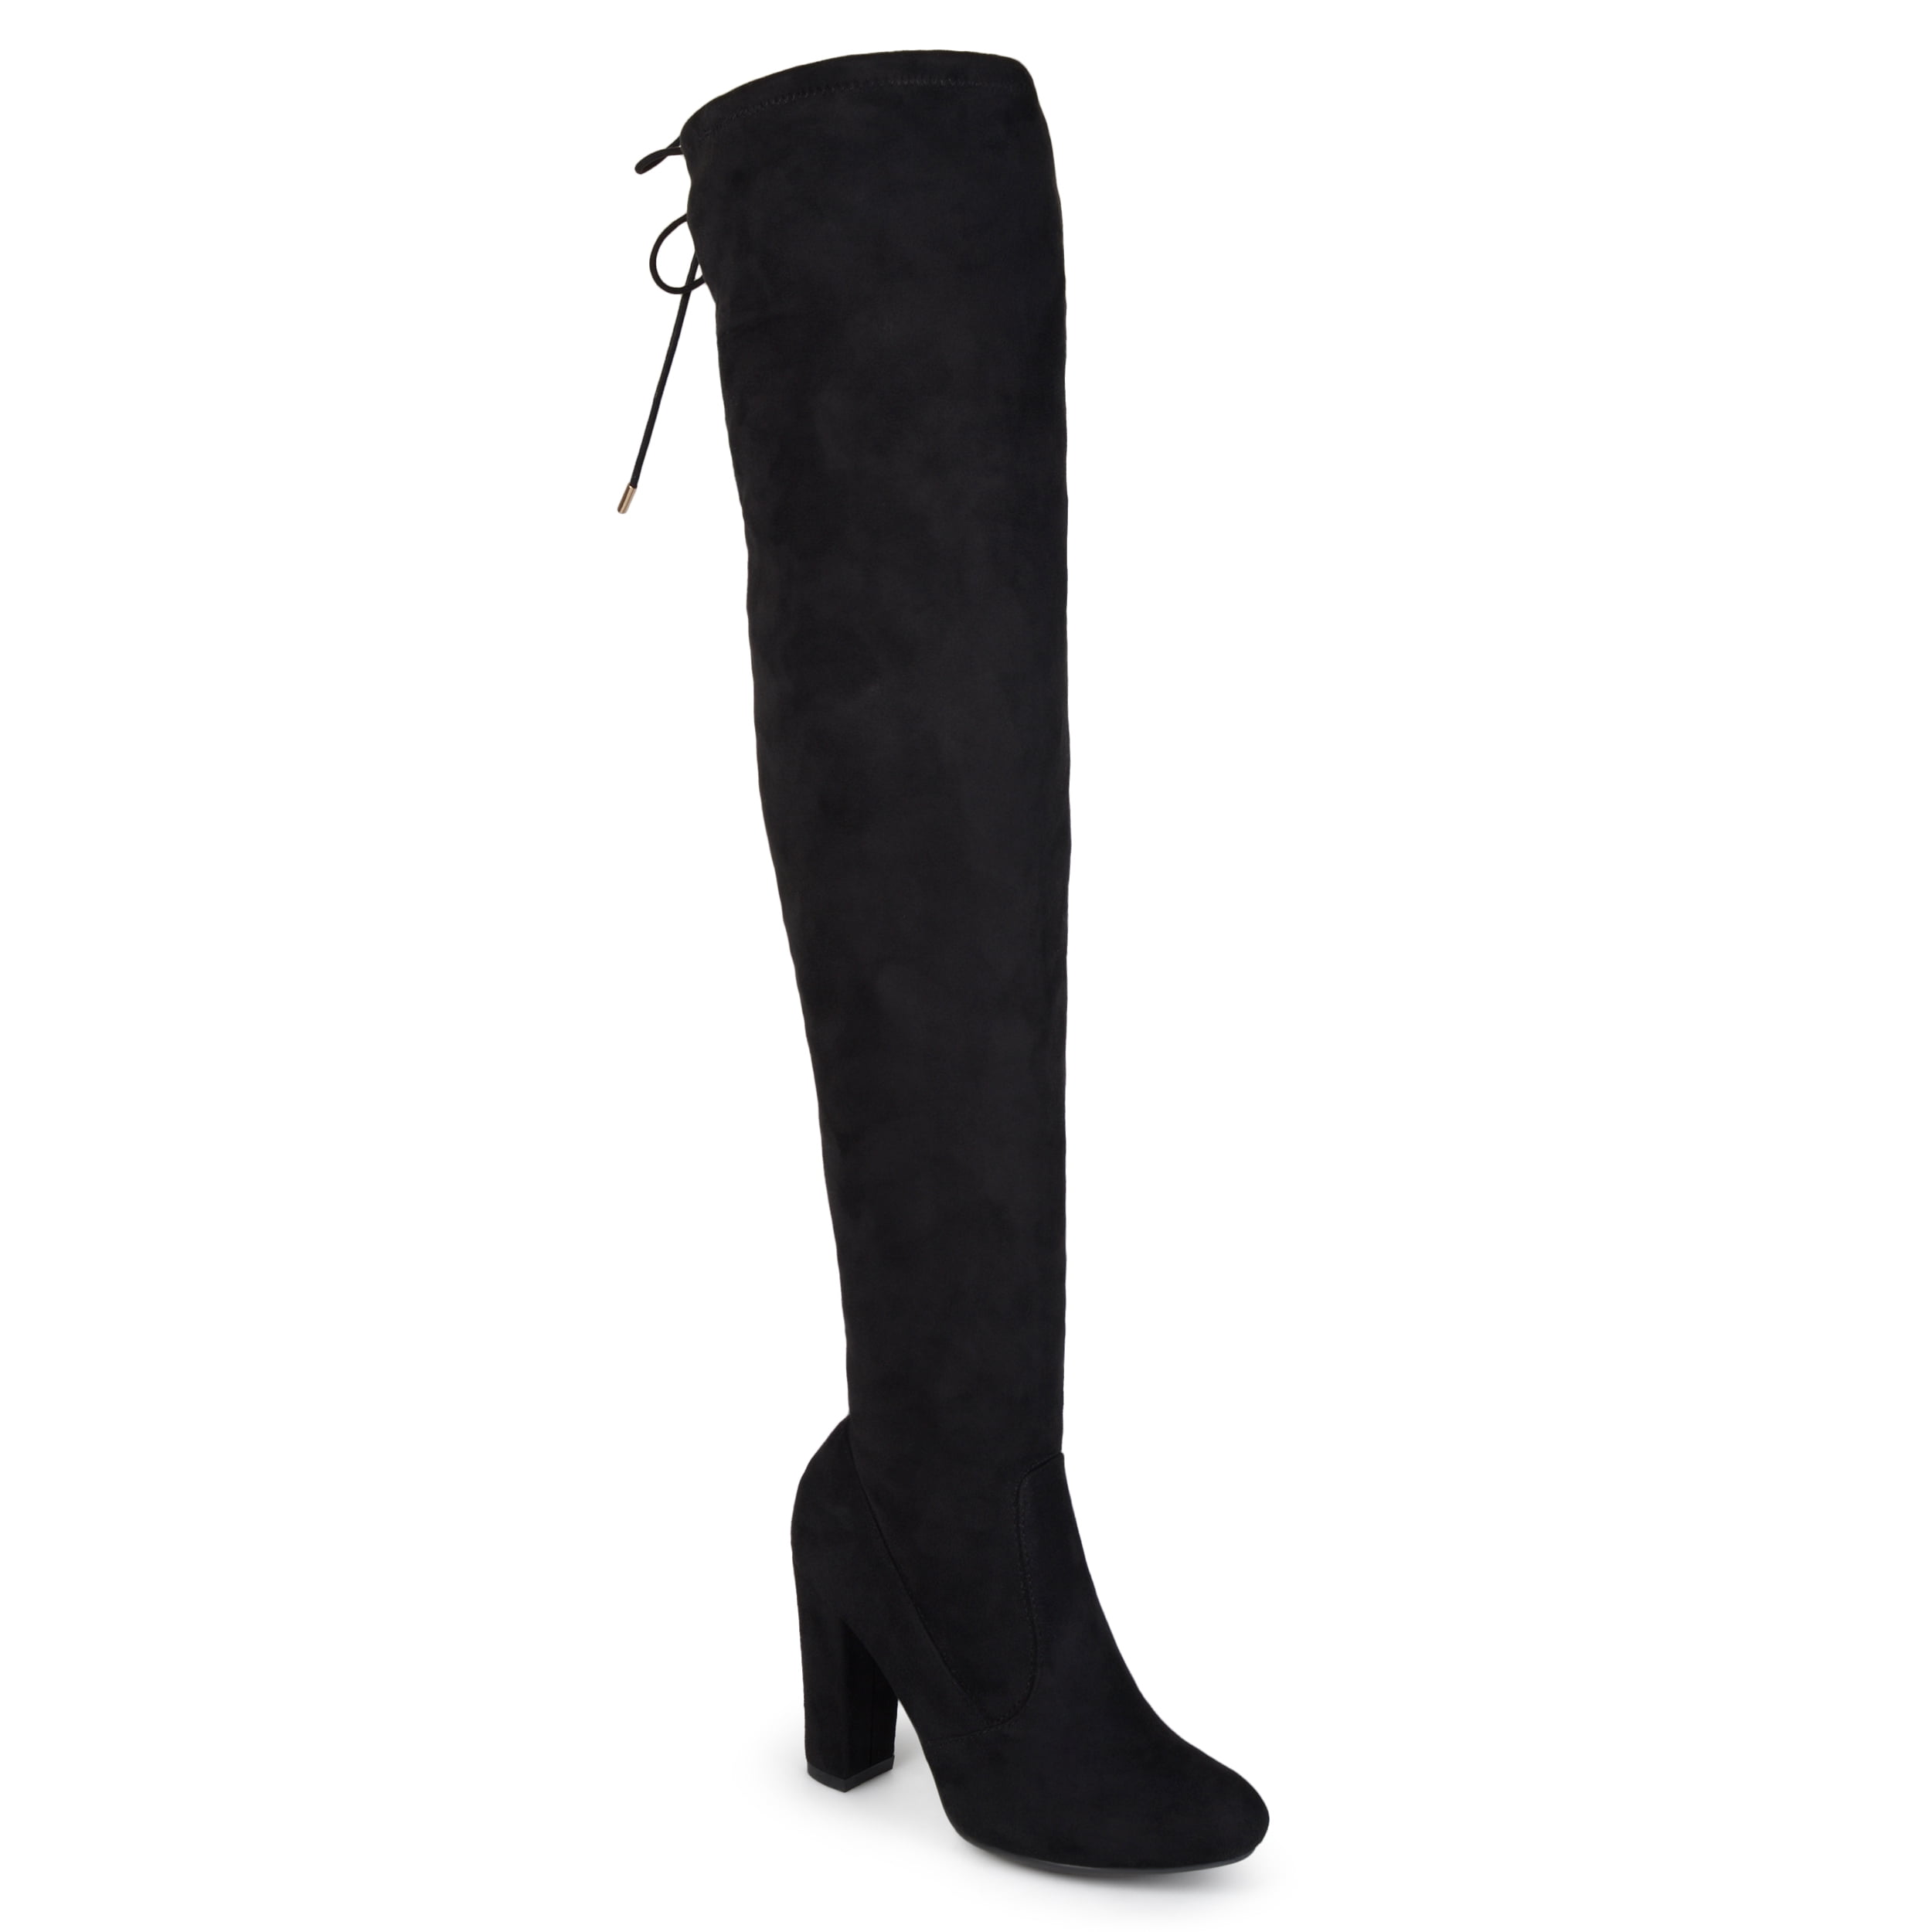 Estimated Mary poll Women's Over-the-knee High Heel Faux Suede Wide Calf Boots - Walmart.com